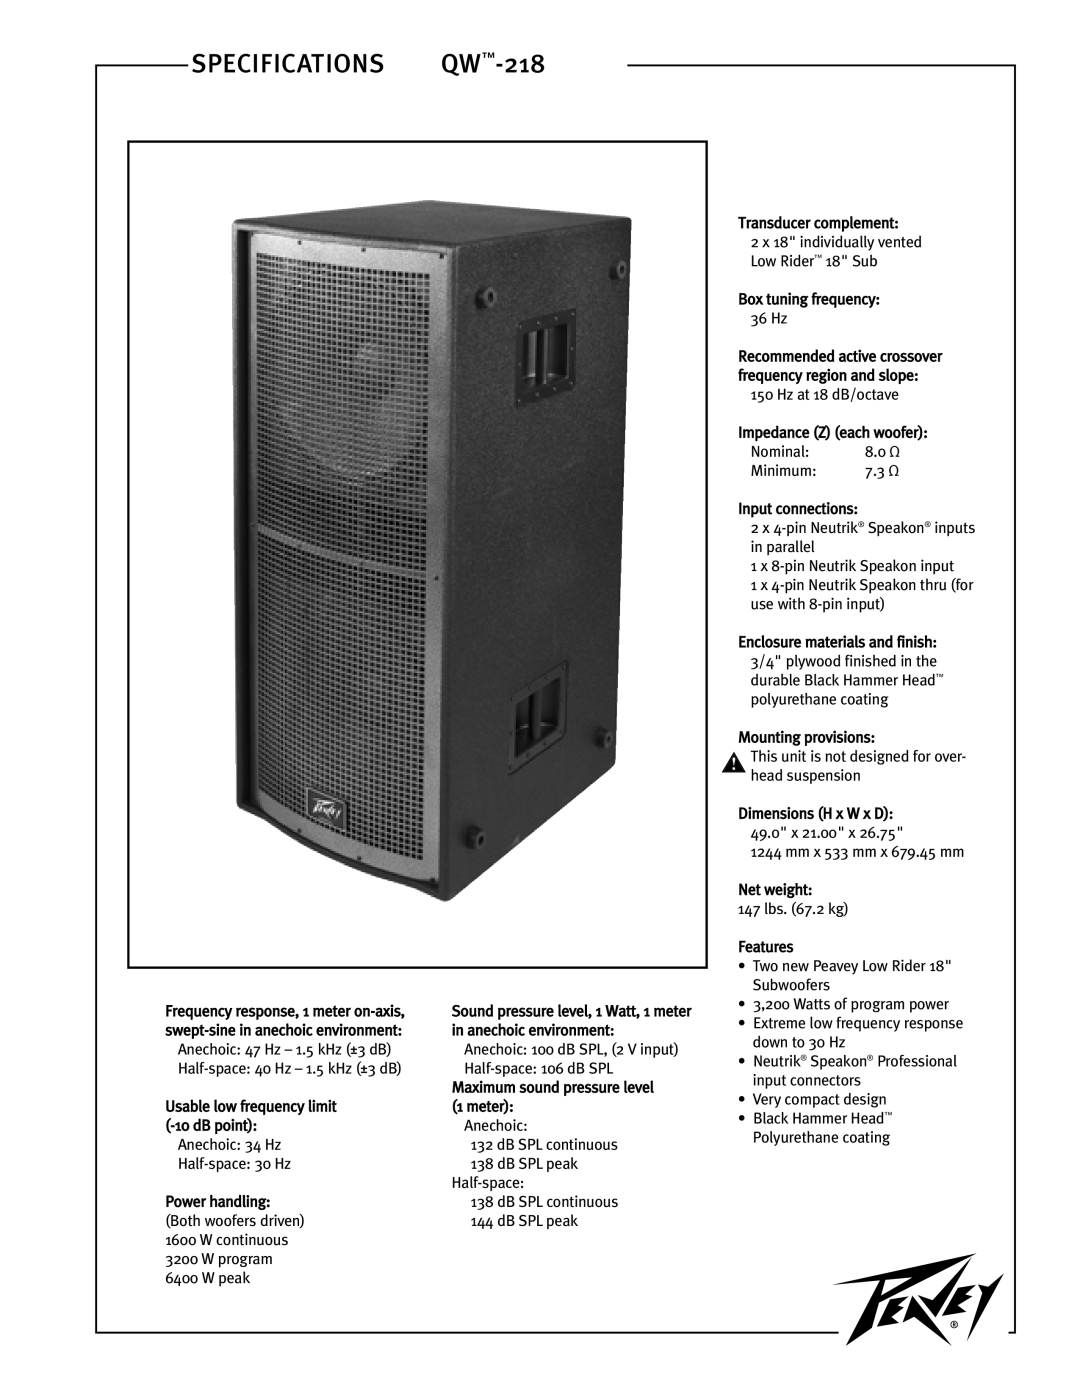 Peavey QW 218 specifications SPECIFICATIONS QW-218 